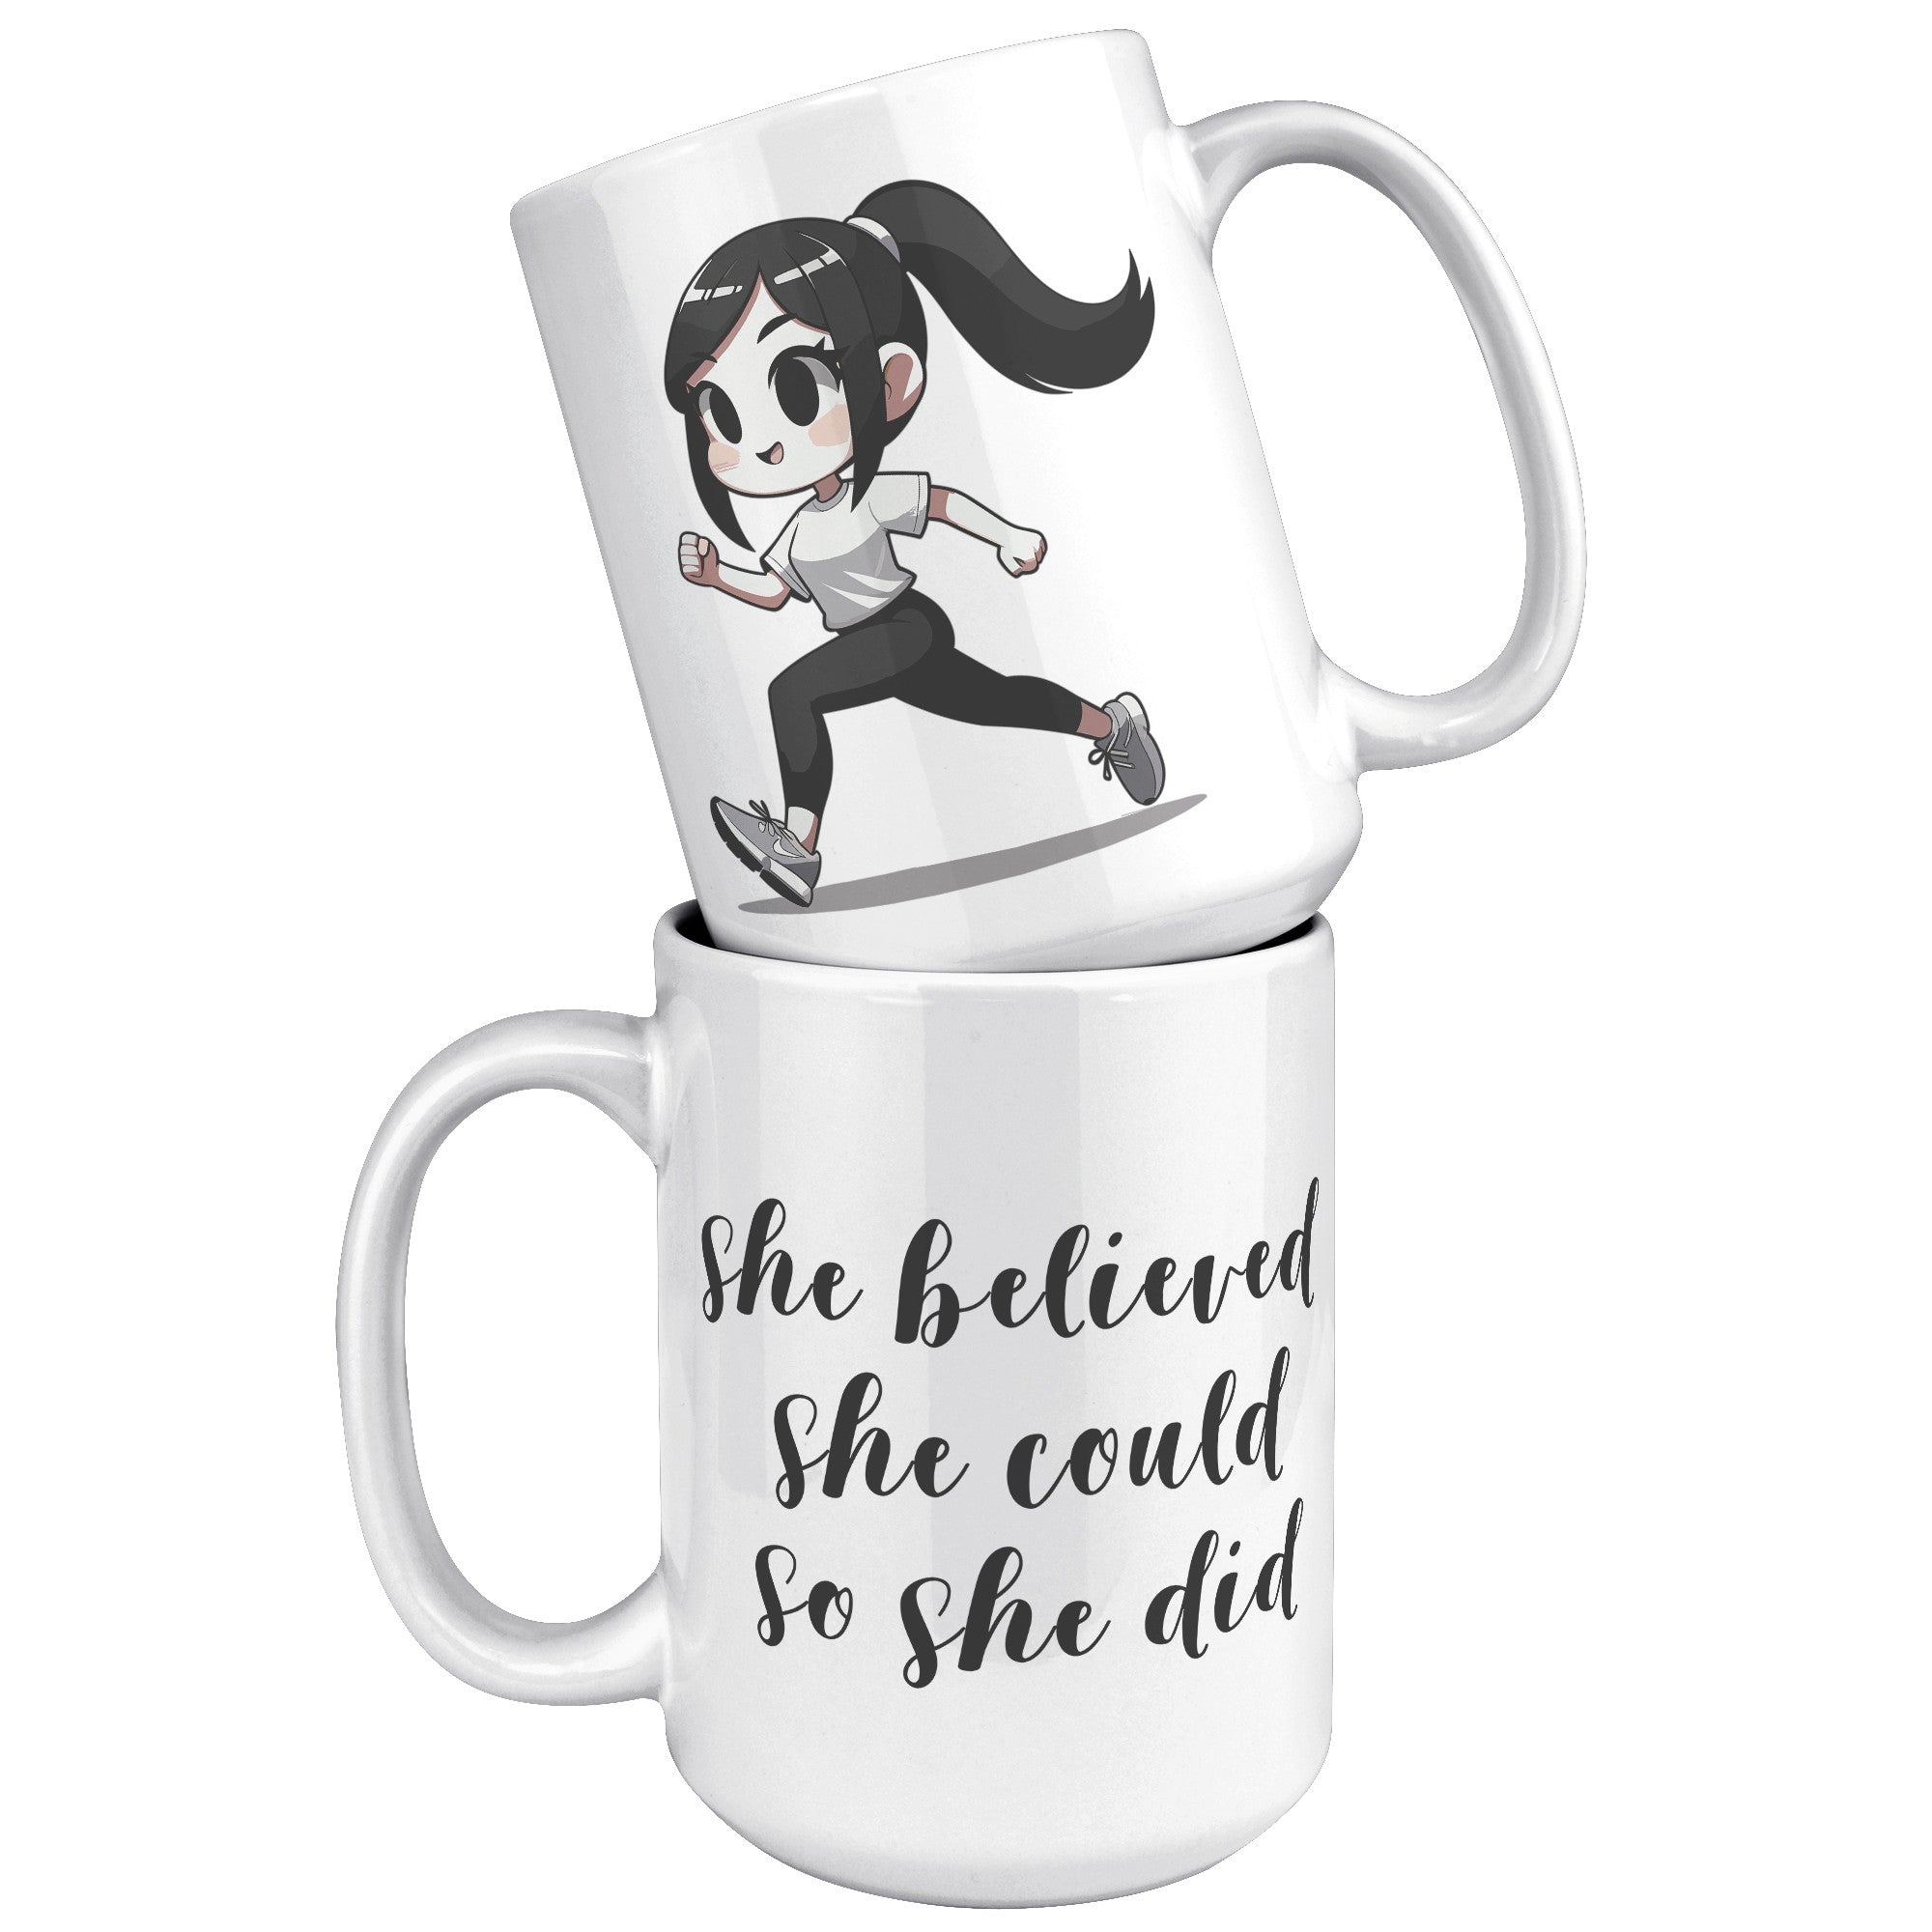 Female Runner Coffee Mug - Inspirational Running Quotes Cup - Perfect Gift for Women Runners - Motivational Marathoner's Morning Brew" - F1